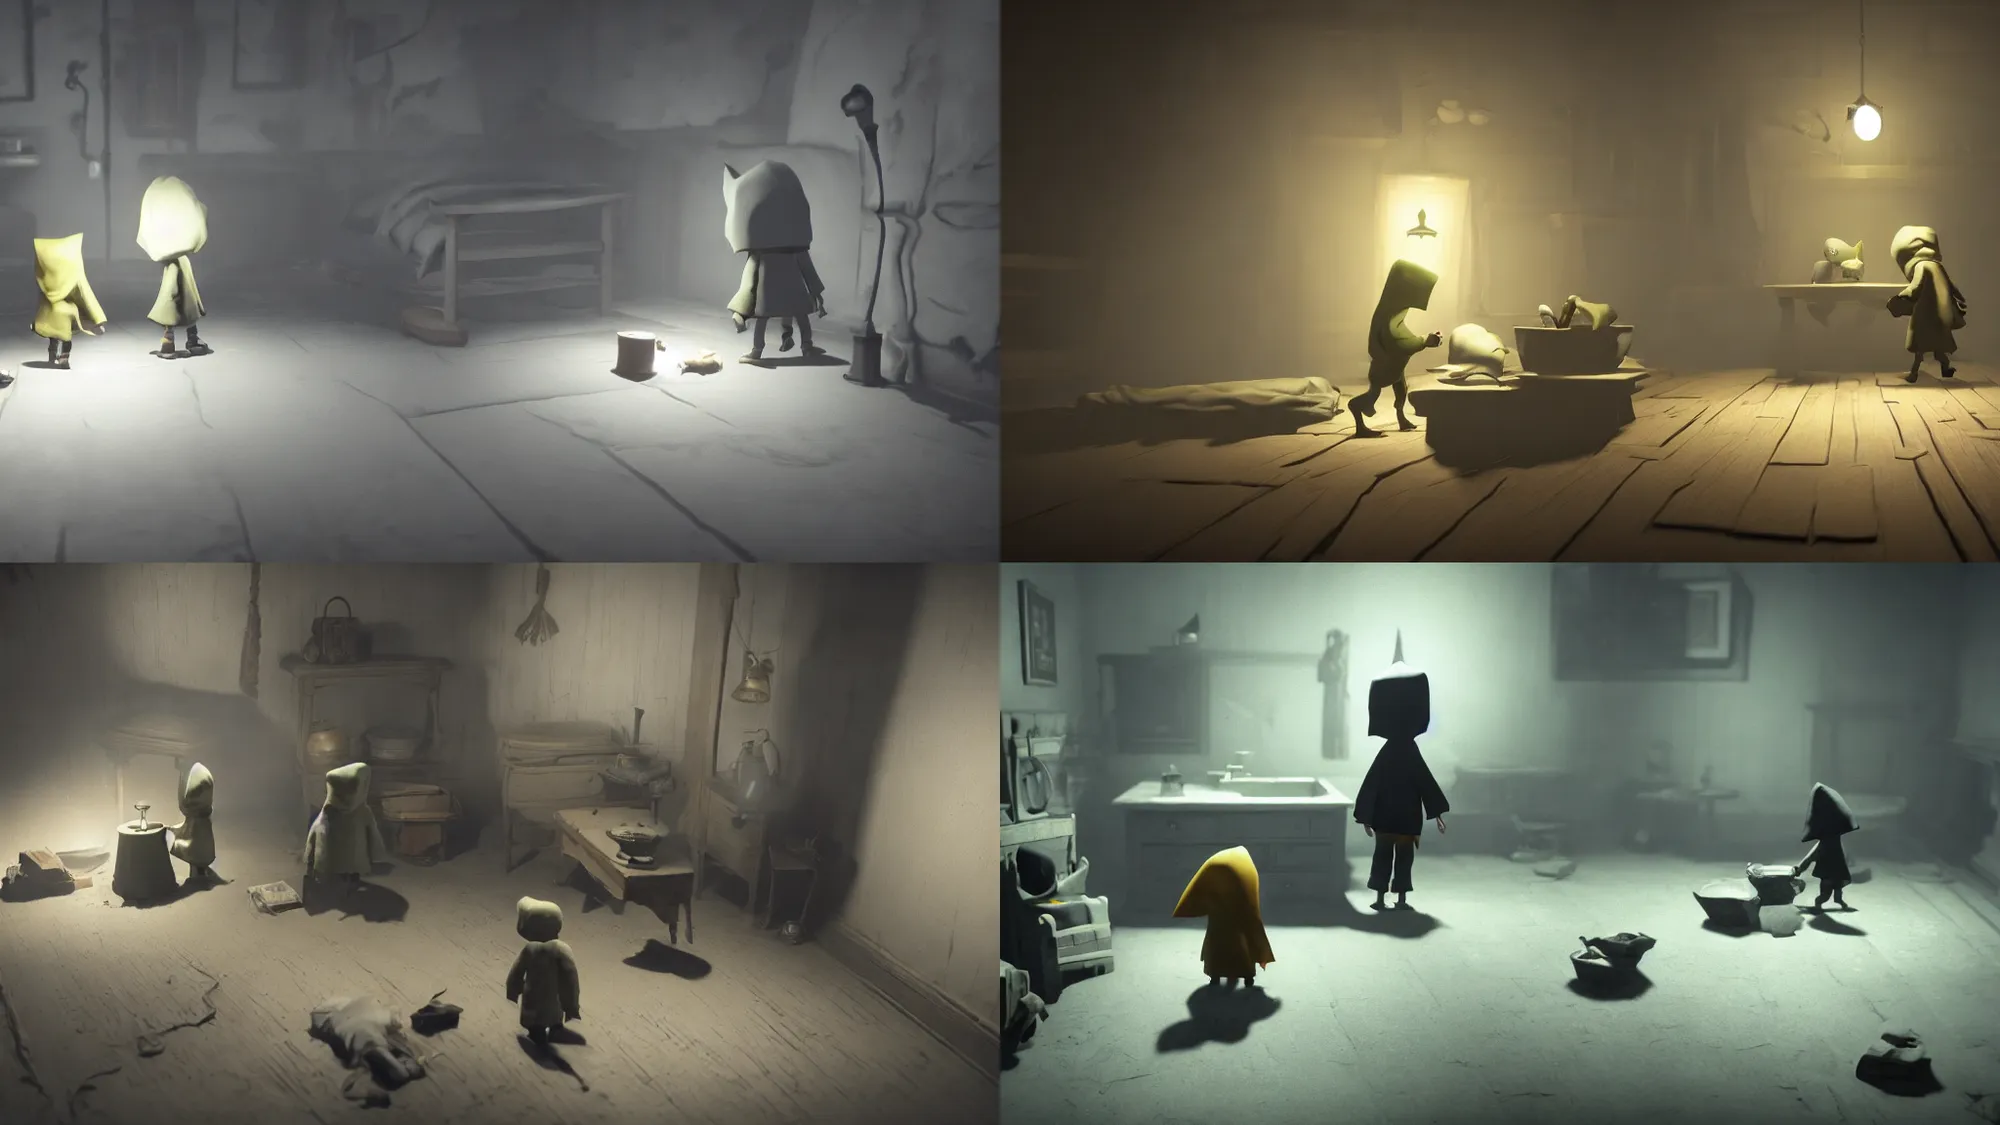 That is How Little Nightmares 2 ends!?, by Stephy Borges